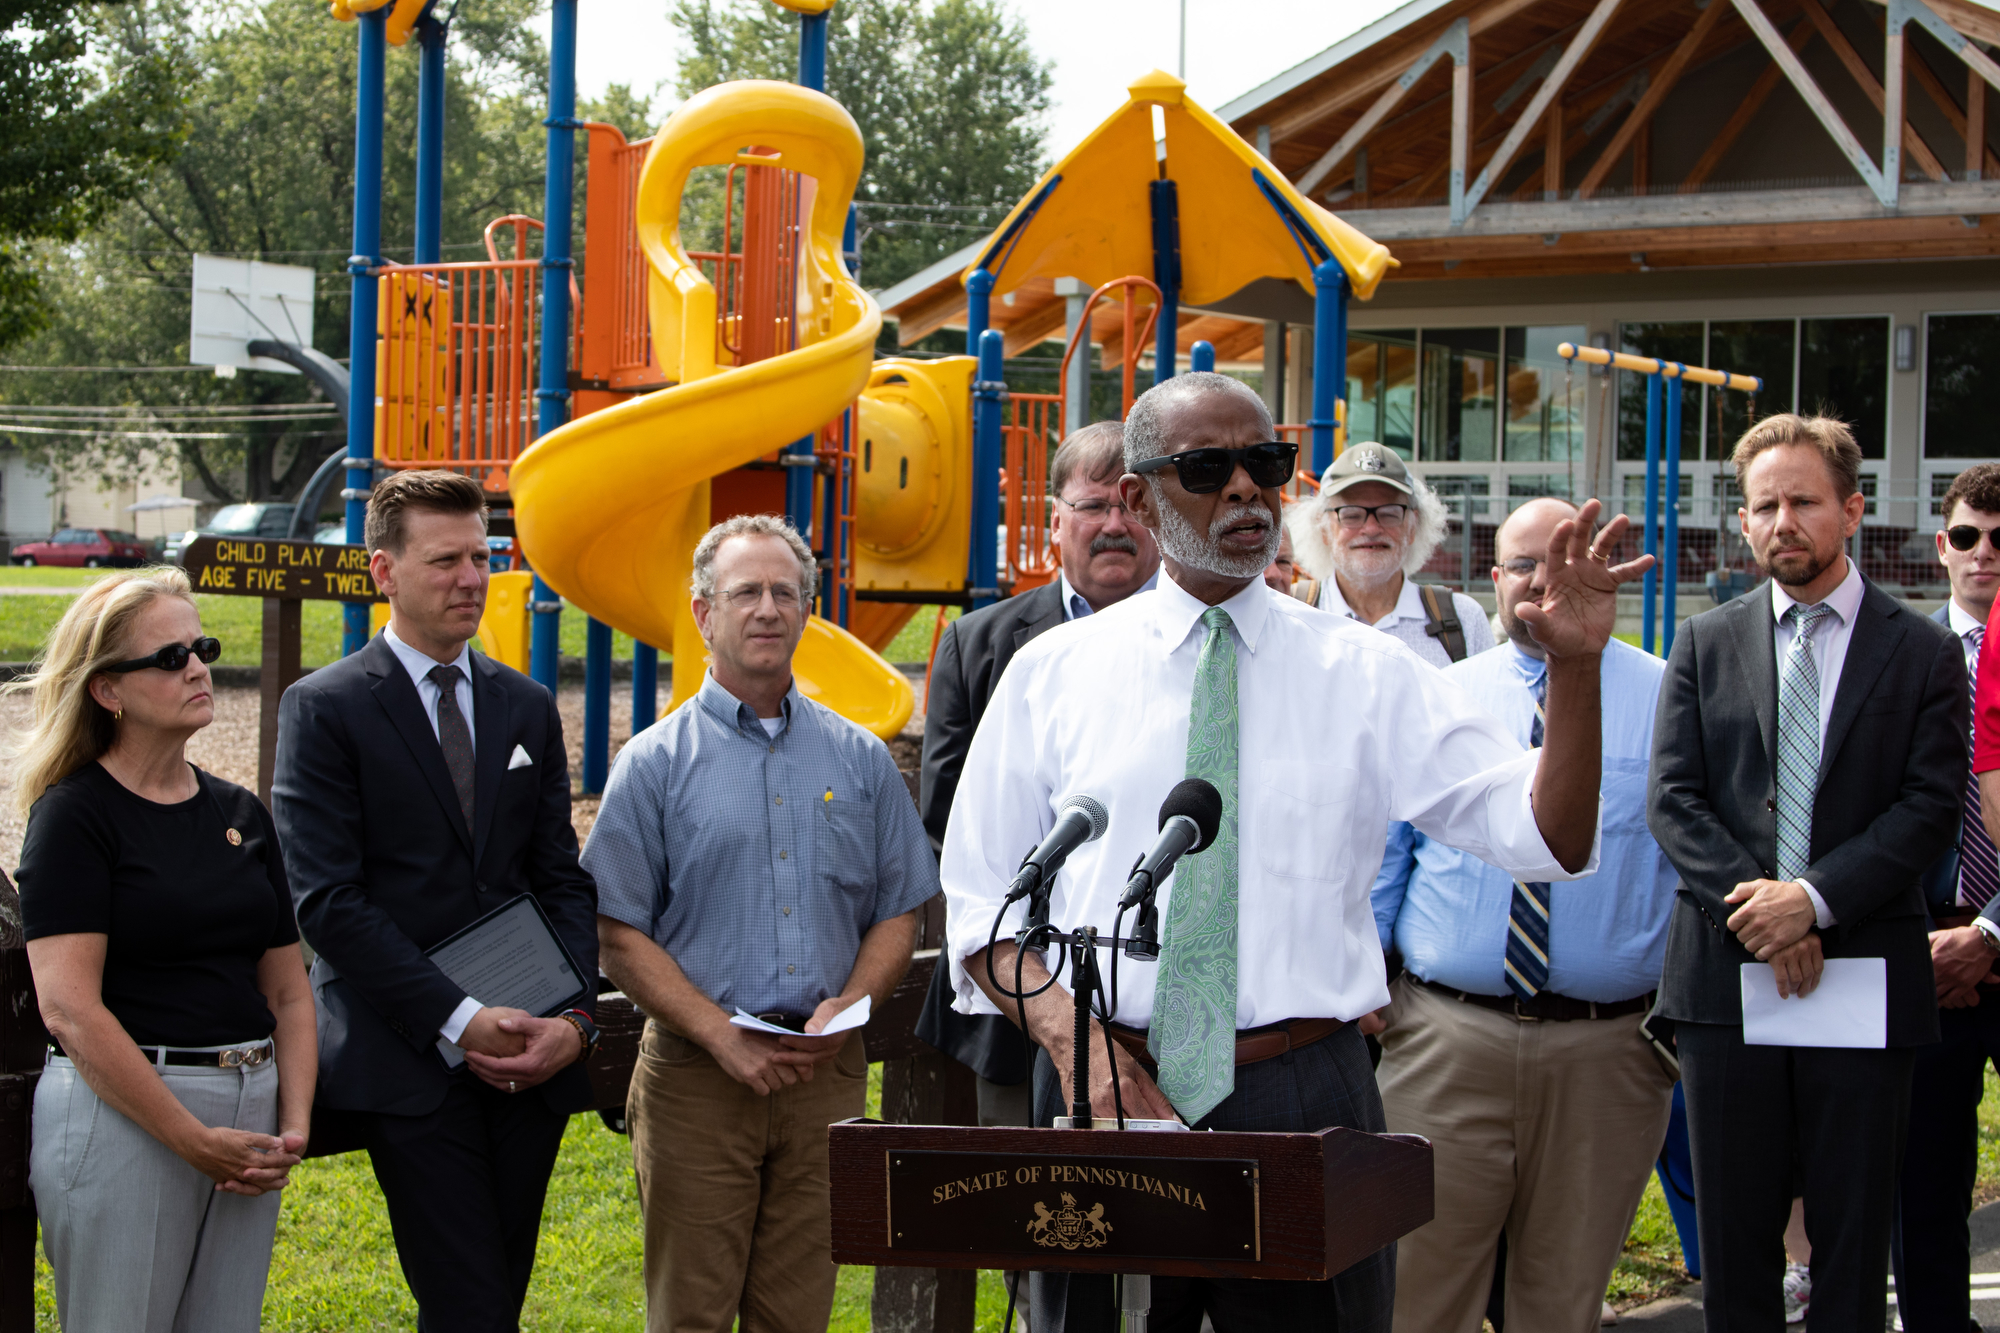 September 4, 2019: State Sen. Art Haywood  led a Clean Energy rally in Abington Township to propose a clean-energy bill that would slash carbon emissions from the electric power sector at least 90 percent by 2040.